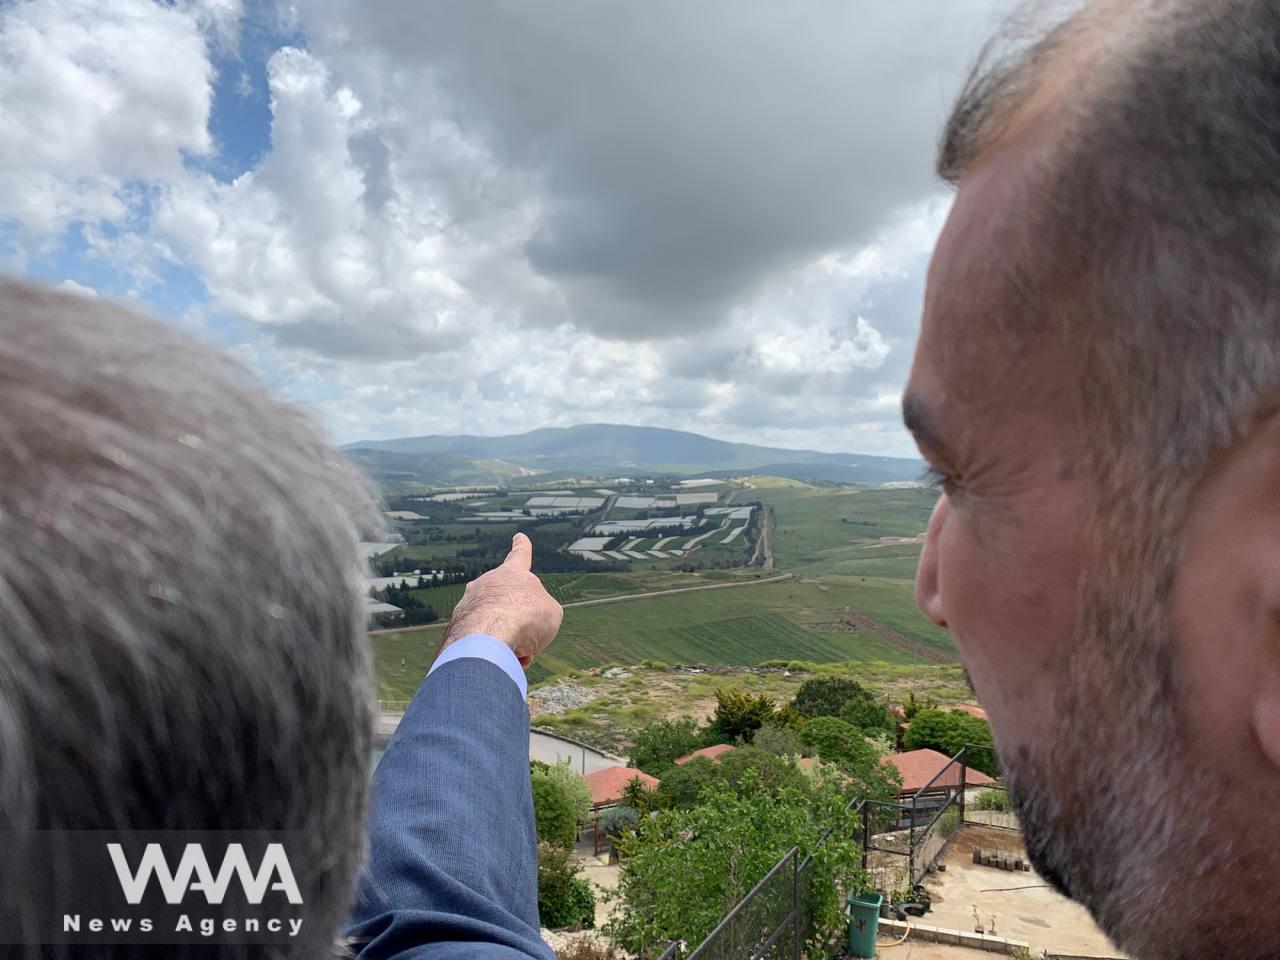 Amir Abdullahiyan, Iran's foreign minister, observes Israel from the zero point of the Lebanese border. FM office / WANA News Agency